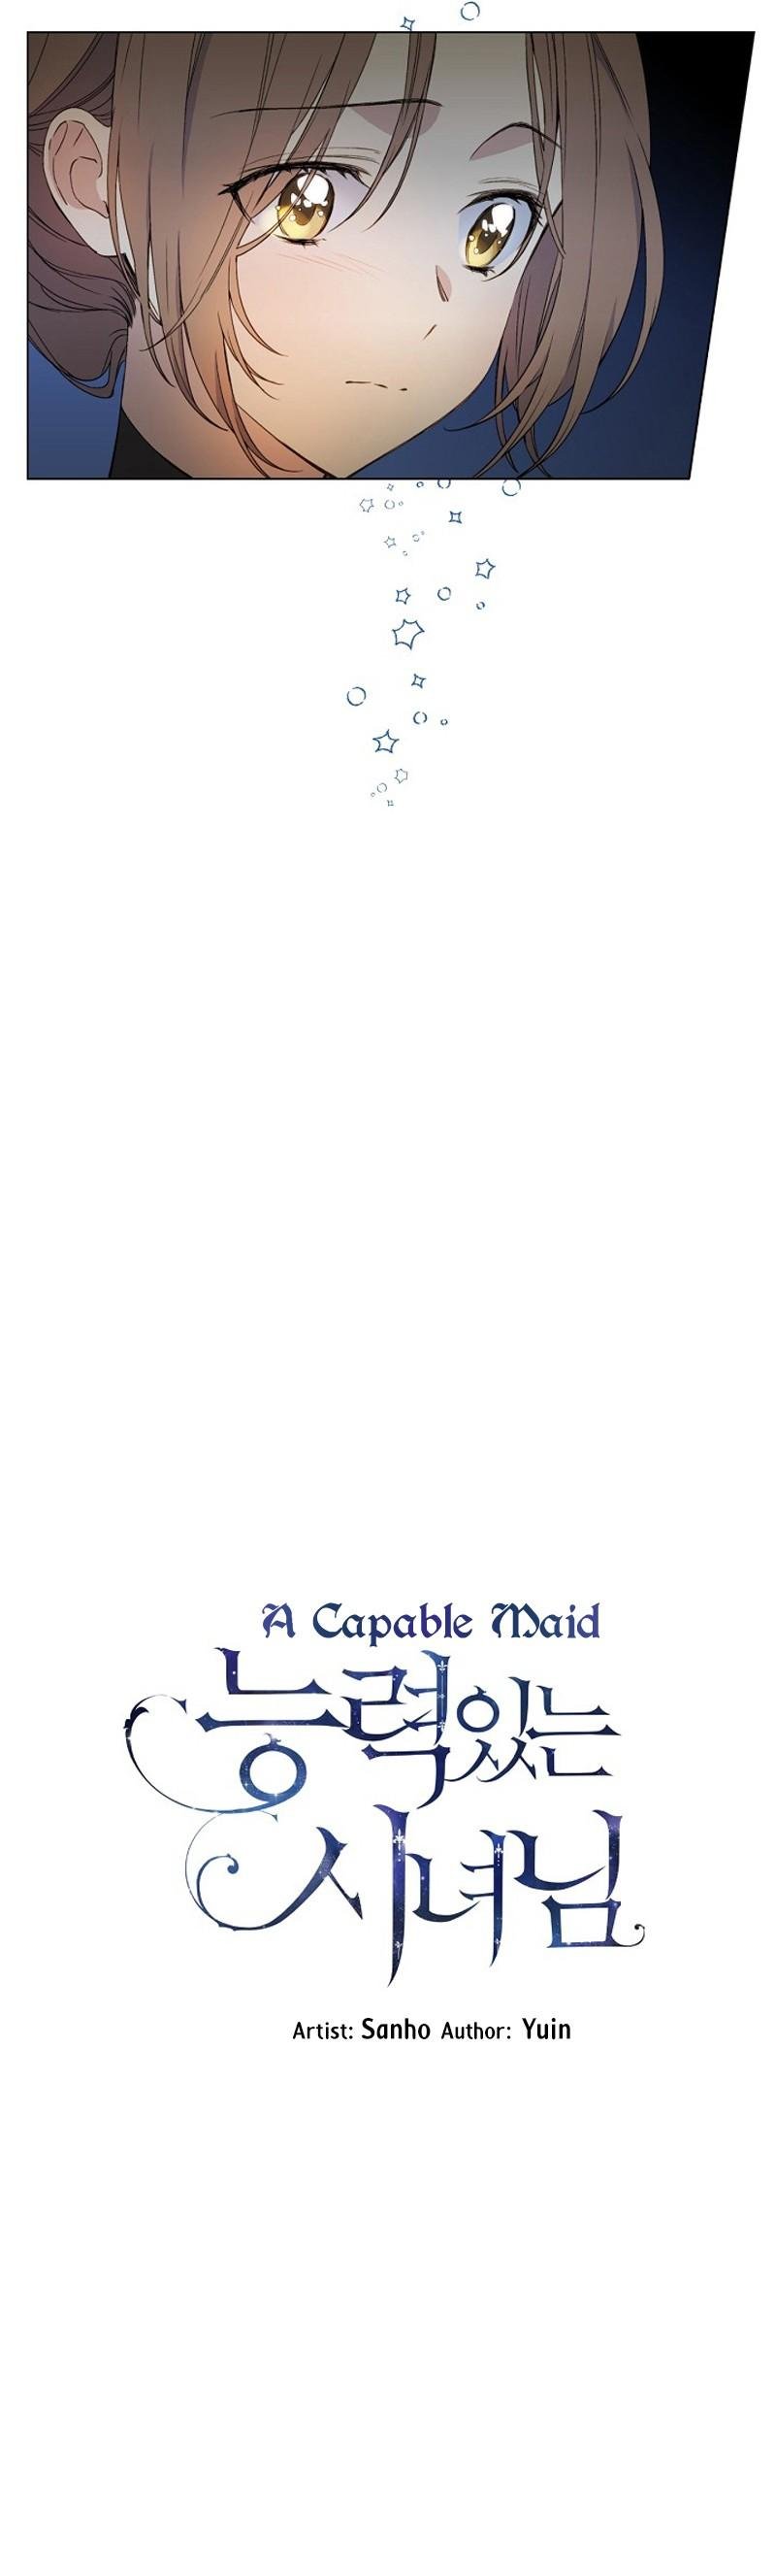 A Capable Maid chapter 7